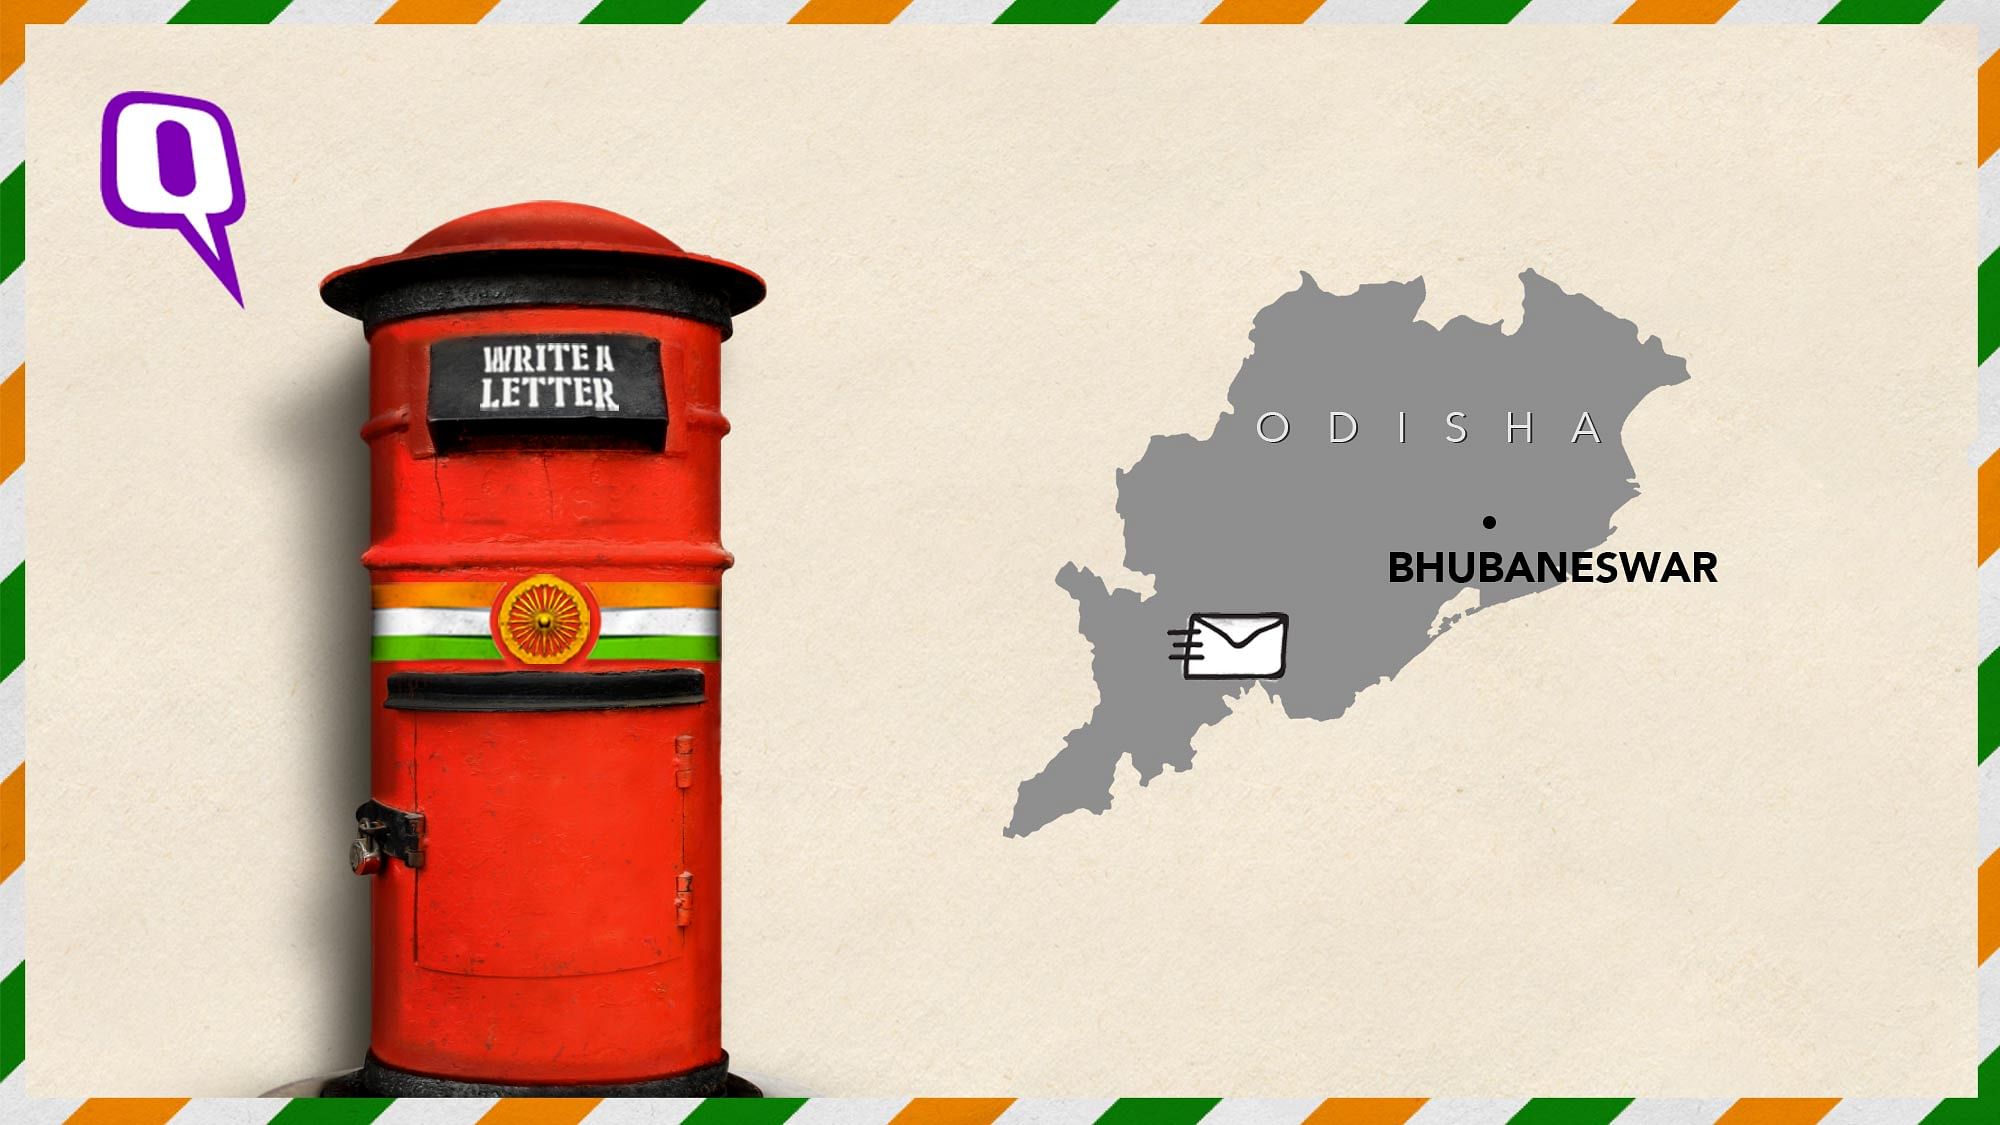 Write your letter to India for Republic Day 2020.&nbsp;